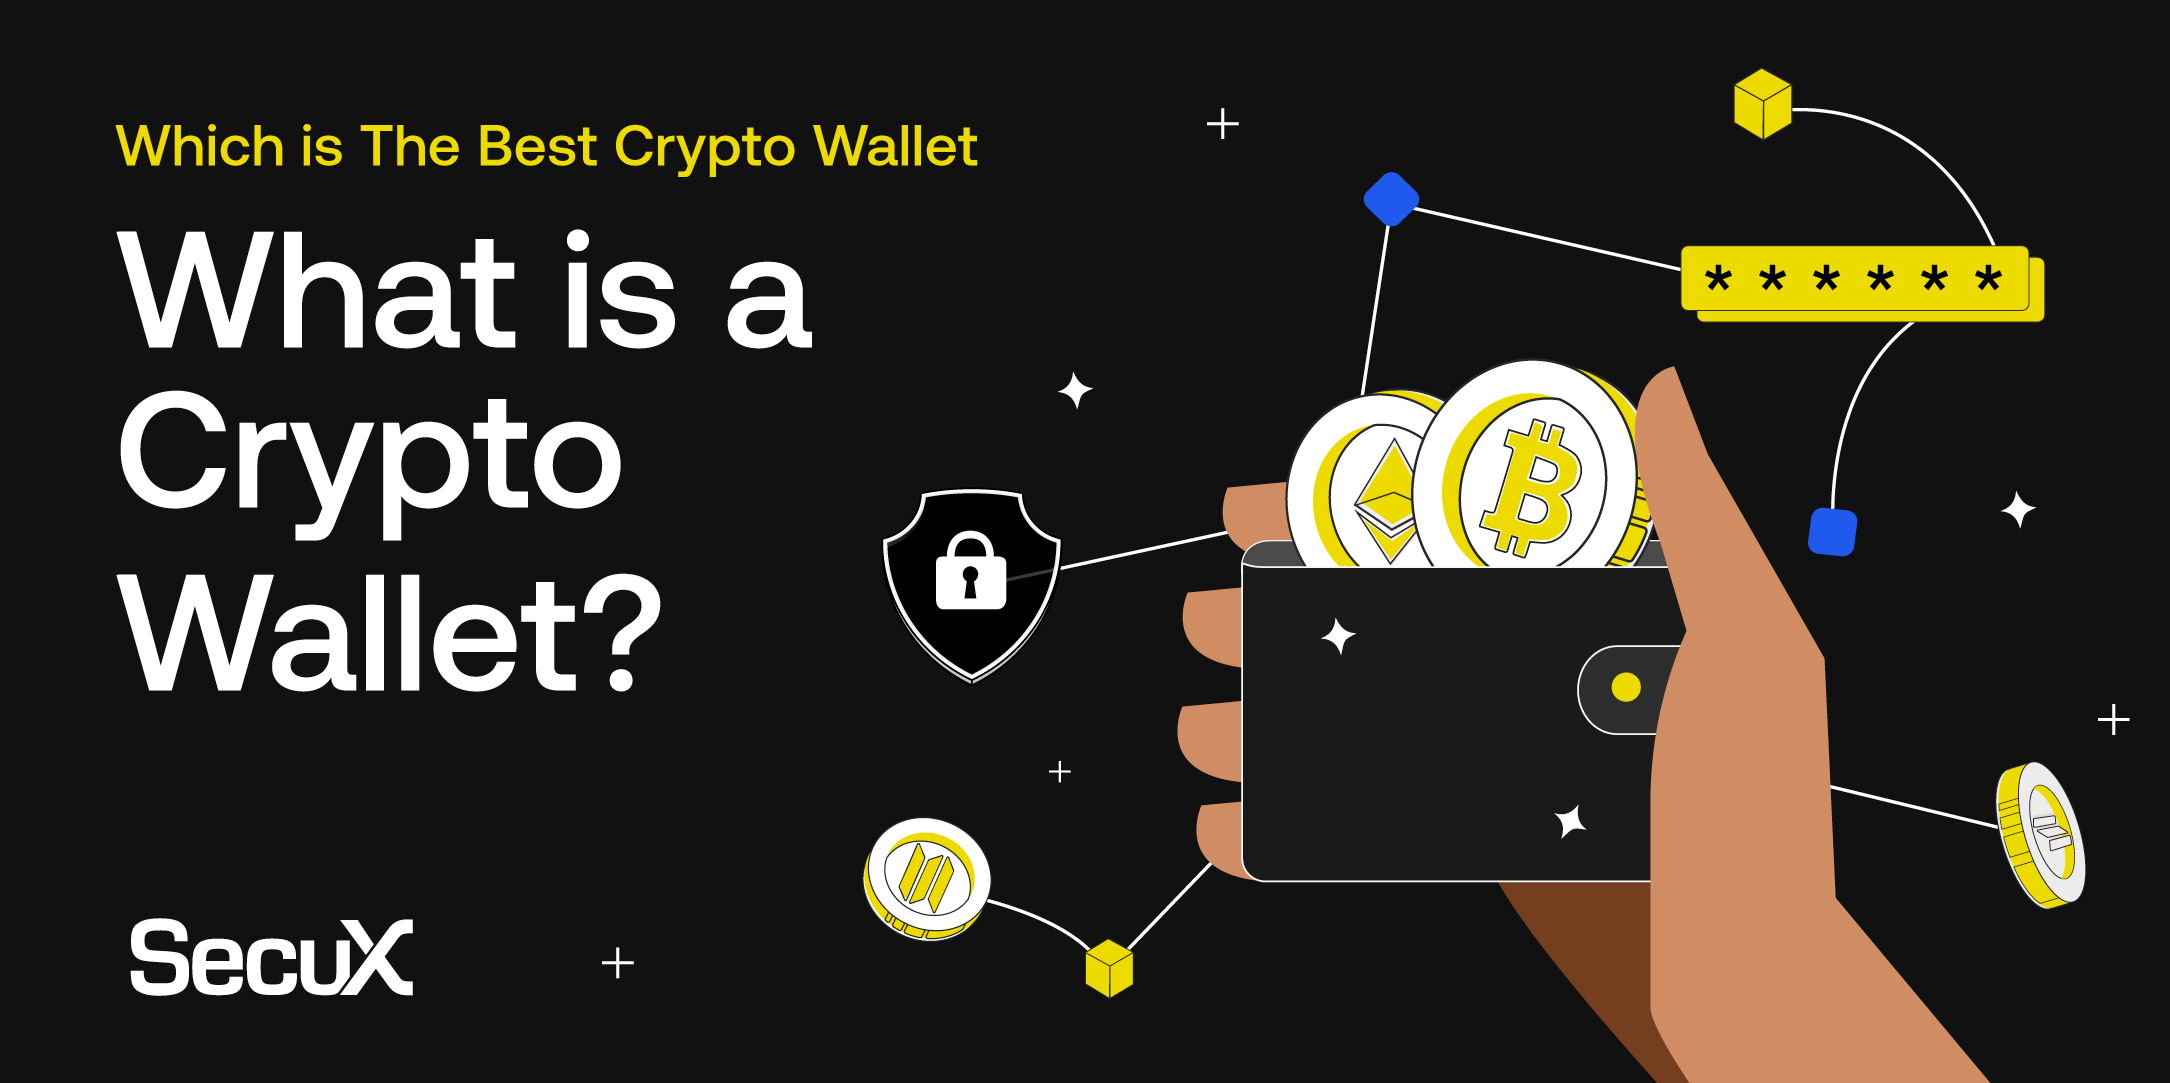 What is a Crypto Wallet? & Which is the best Crypto Wallet?